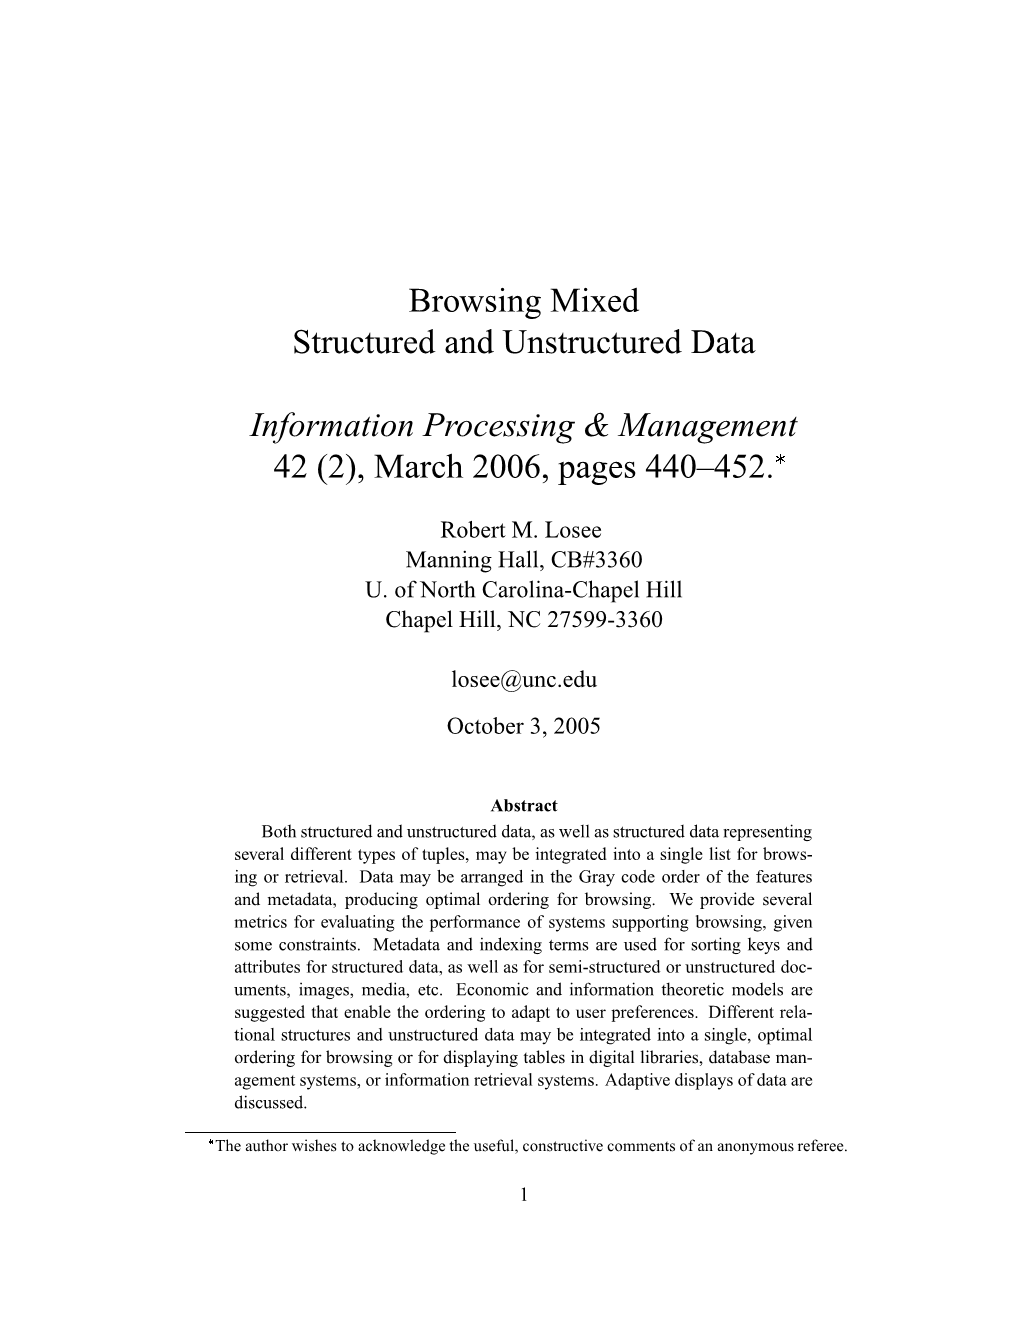 Browsing Mixed Structured and Unstructured Data Information